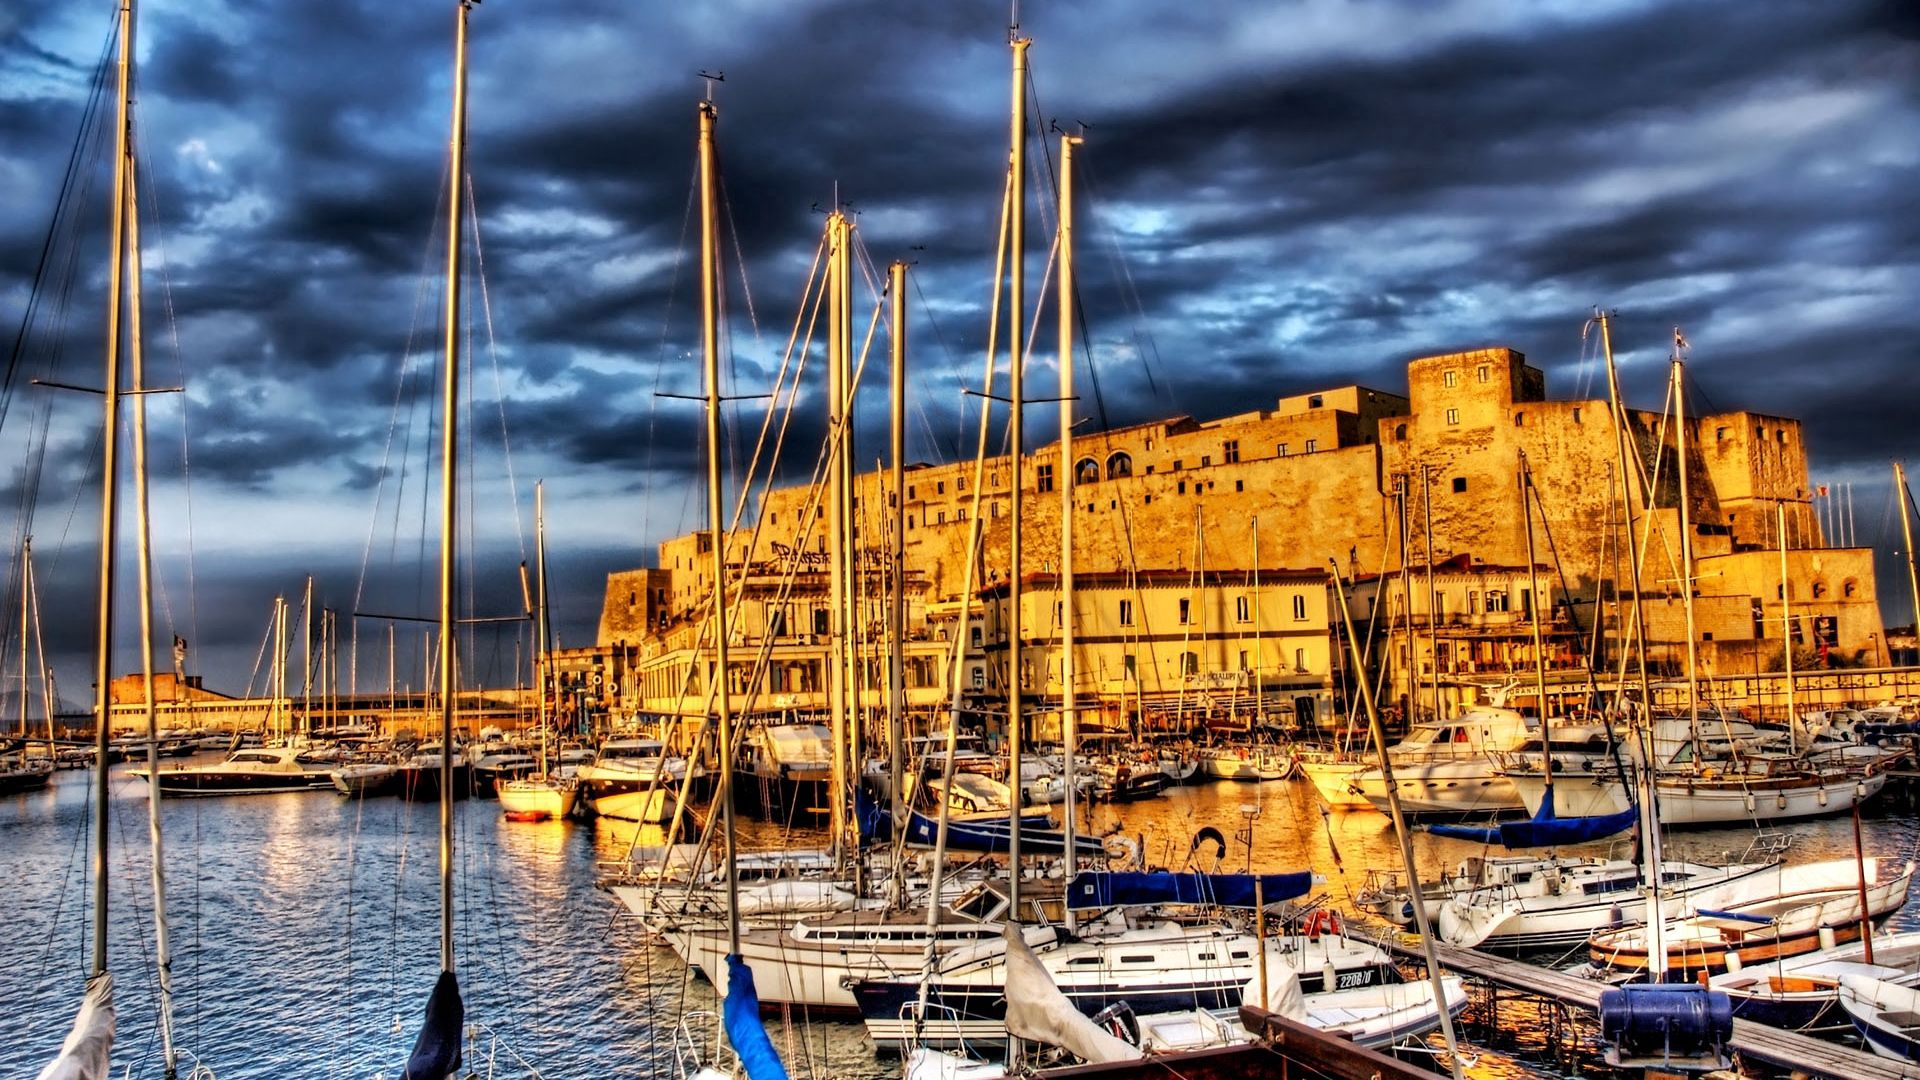 boats, cities, yachts, building, pier, france, hdr, terra minor